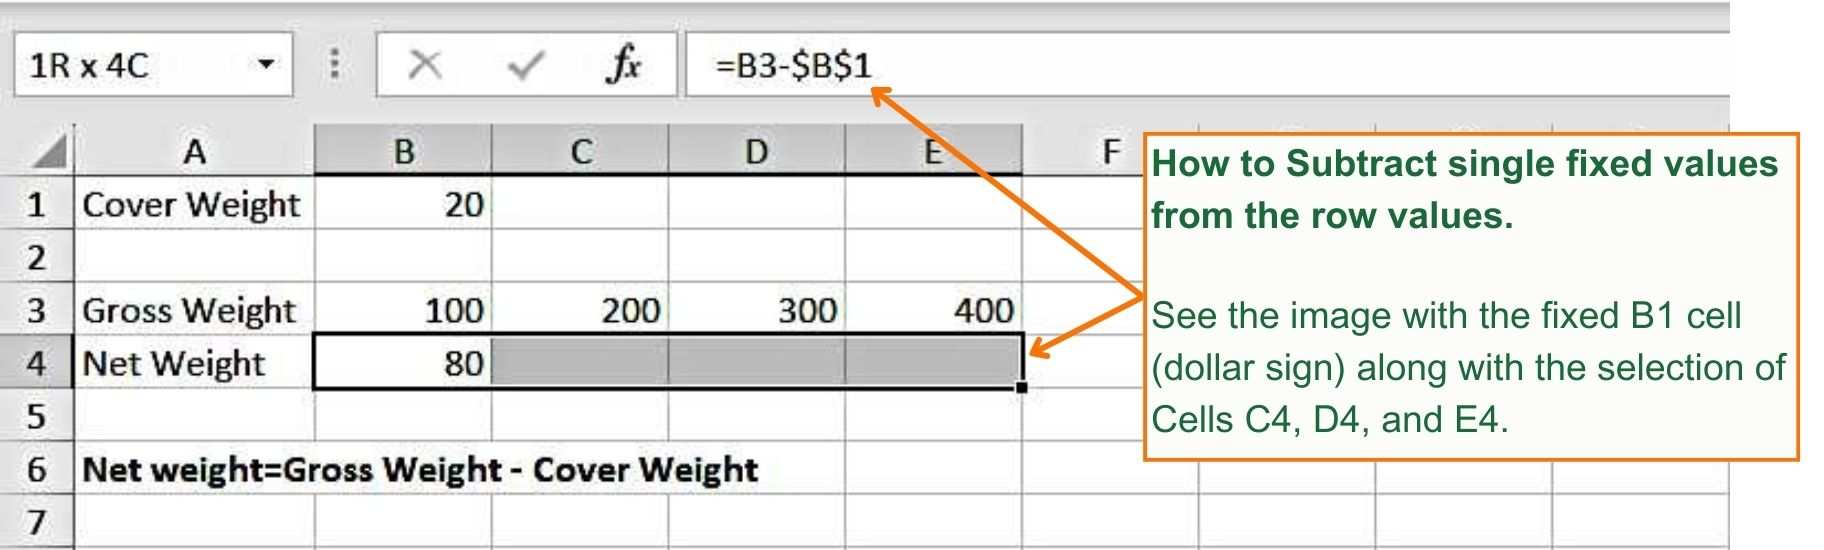 How to Subtract single fixed values from the row values - Excel Hippo